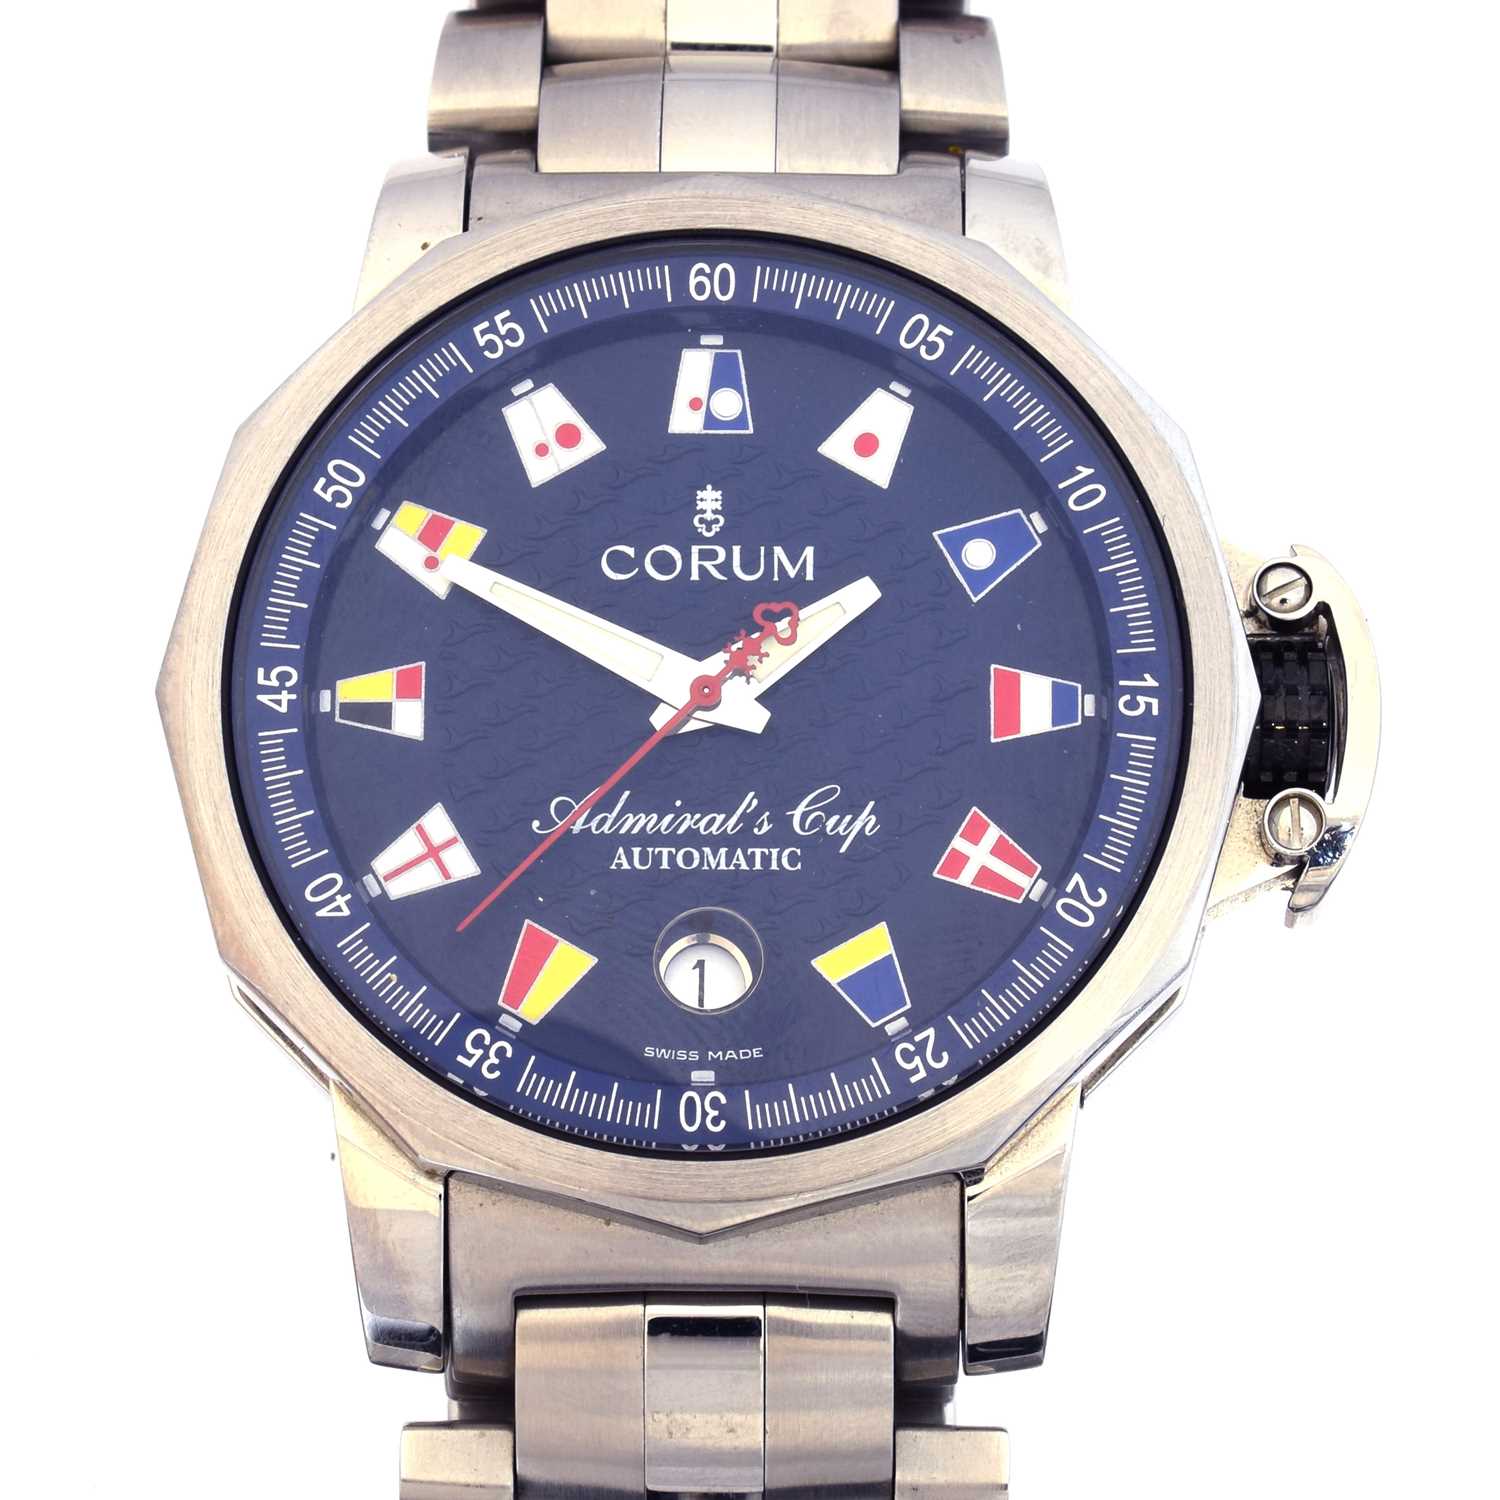 Lot 165 - A Corum 'Admiral's Cup' automatic wristwatch